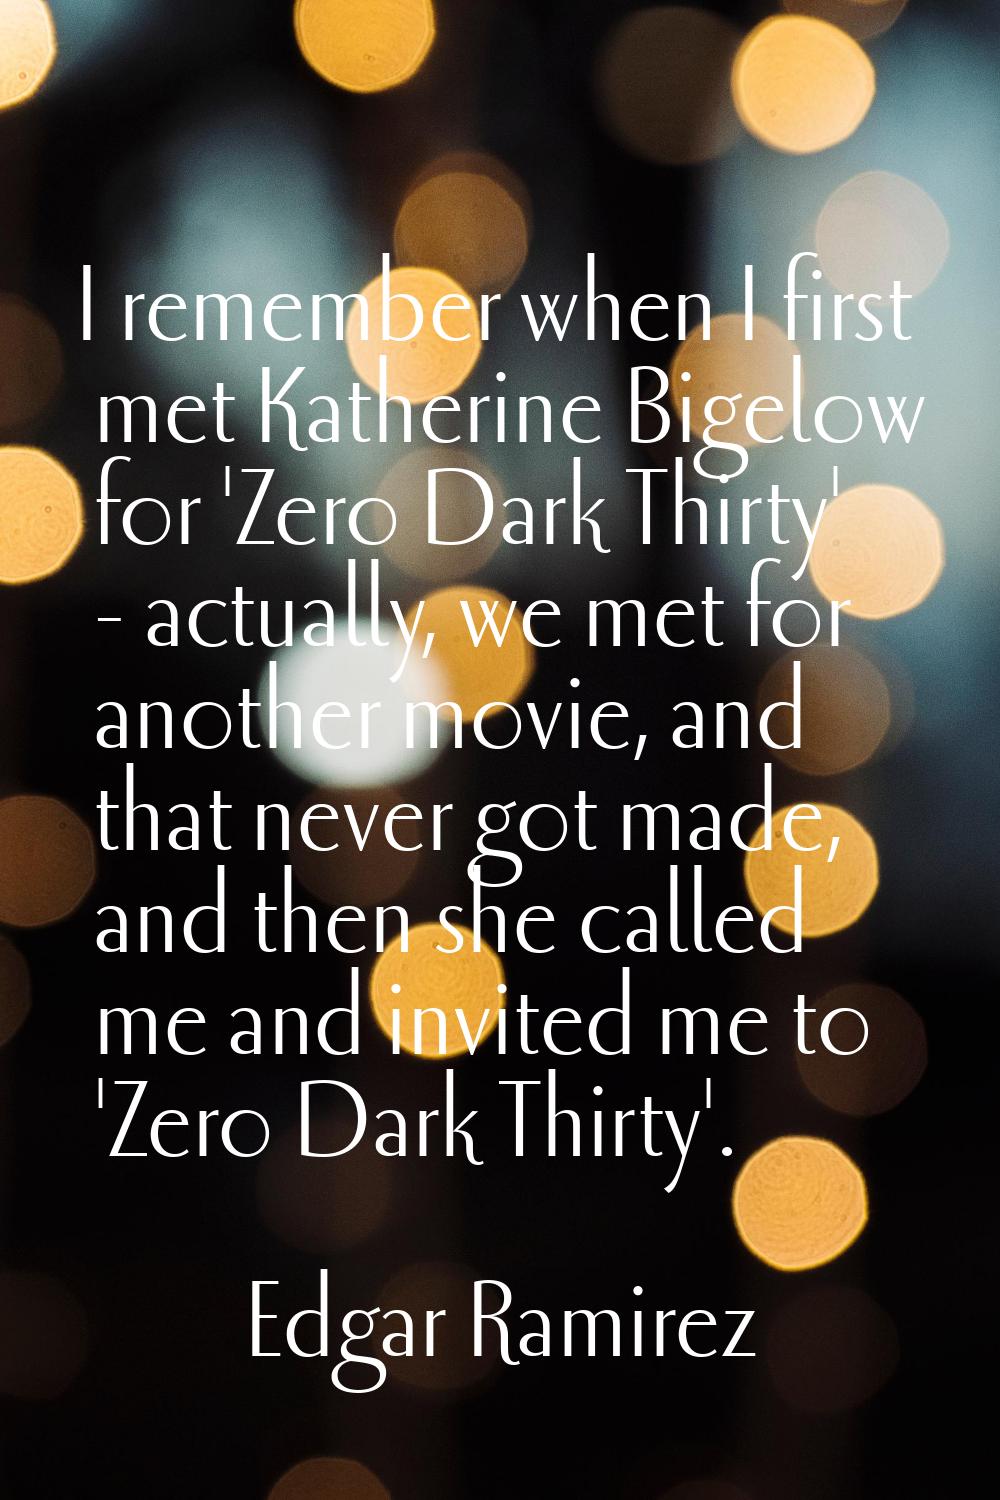 I remember when I first met Katherine Bigelow for 'Zero Dark Thirty' - actually, we met for another